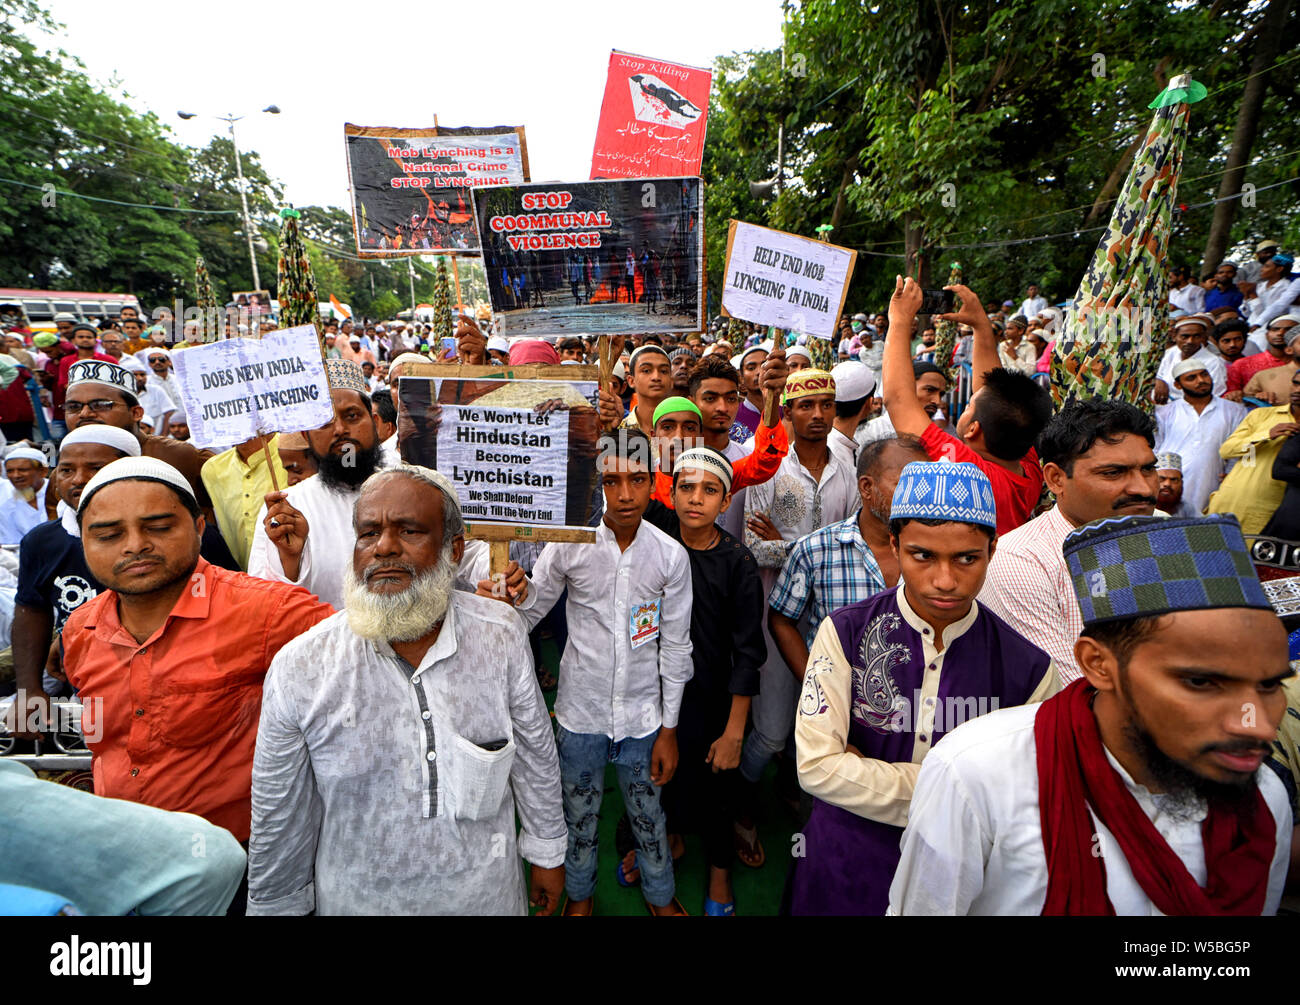 Protesters from the different Minority community of India hold placards during the Mob Lynching Protest in Kolkata.Protest against the recent Mob lynching incidents at different part of India, in 2019 hate crimes in the name of religion are constantly increasing and disturbing communal harmonies of the country at different states. Stock Photo